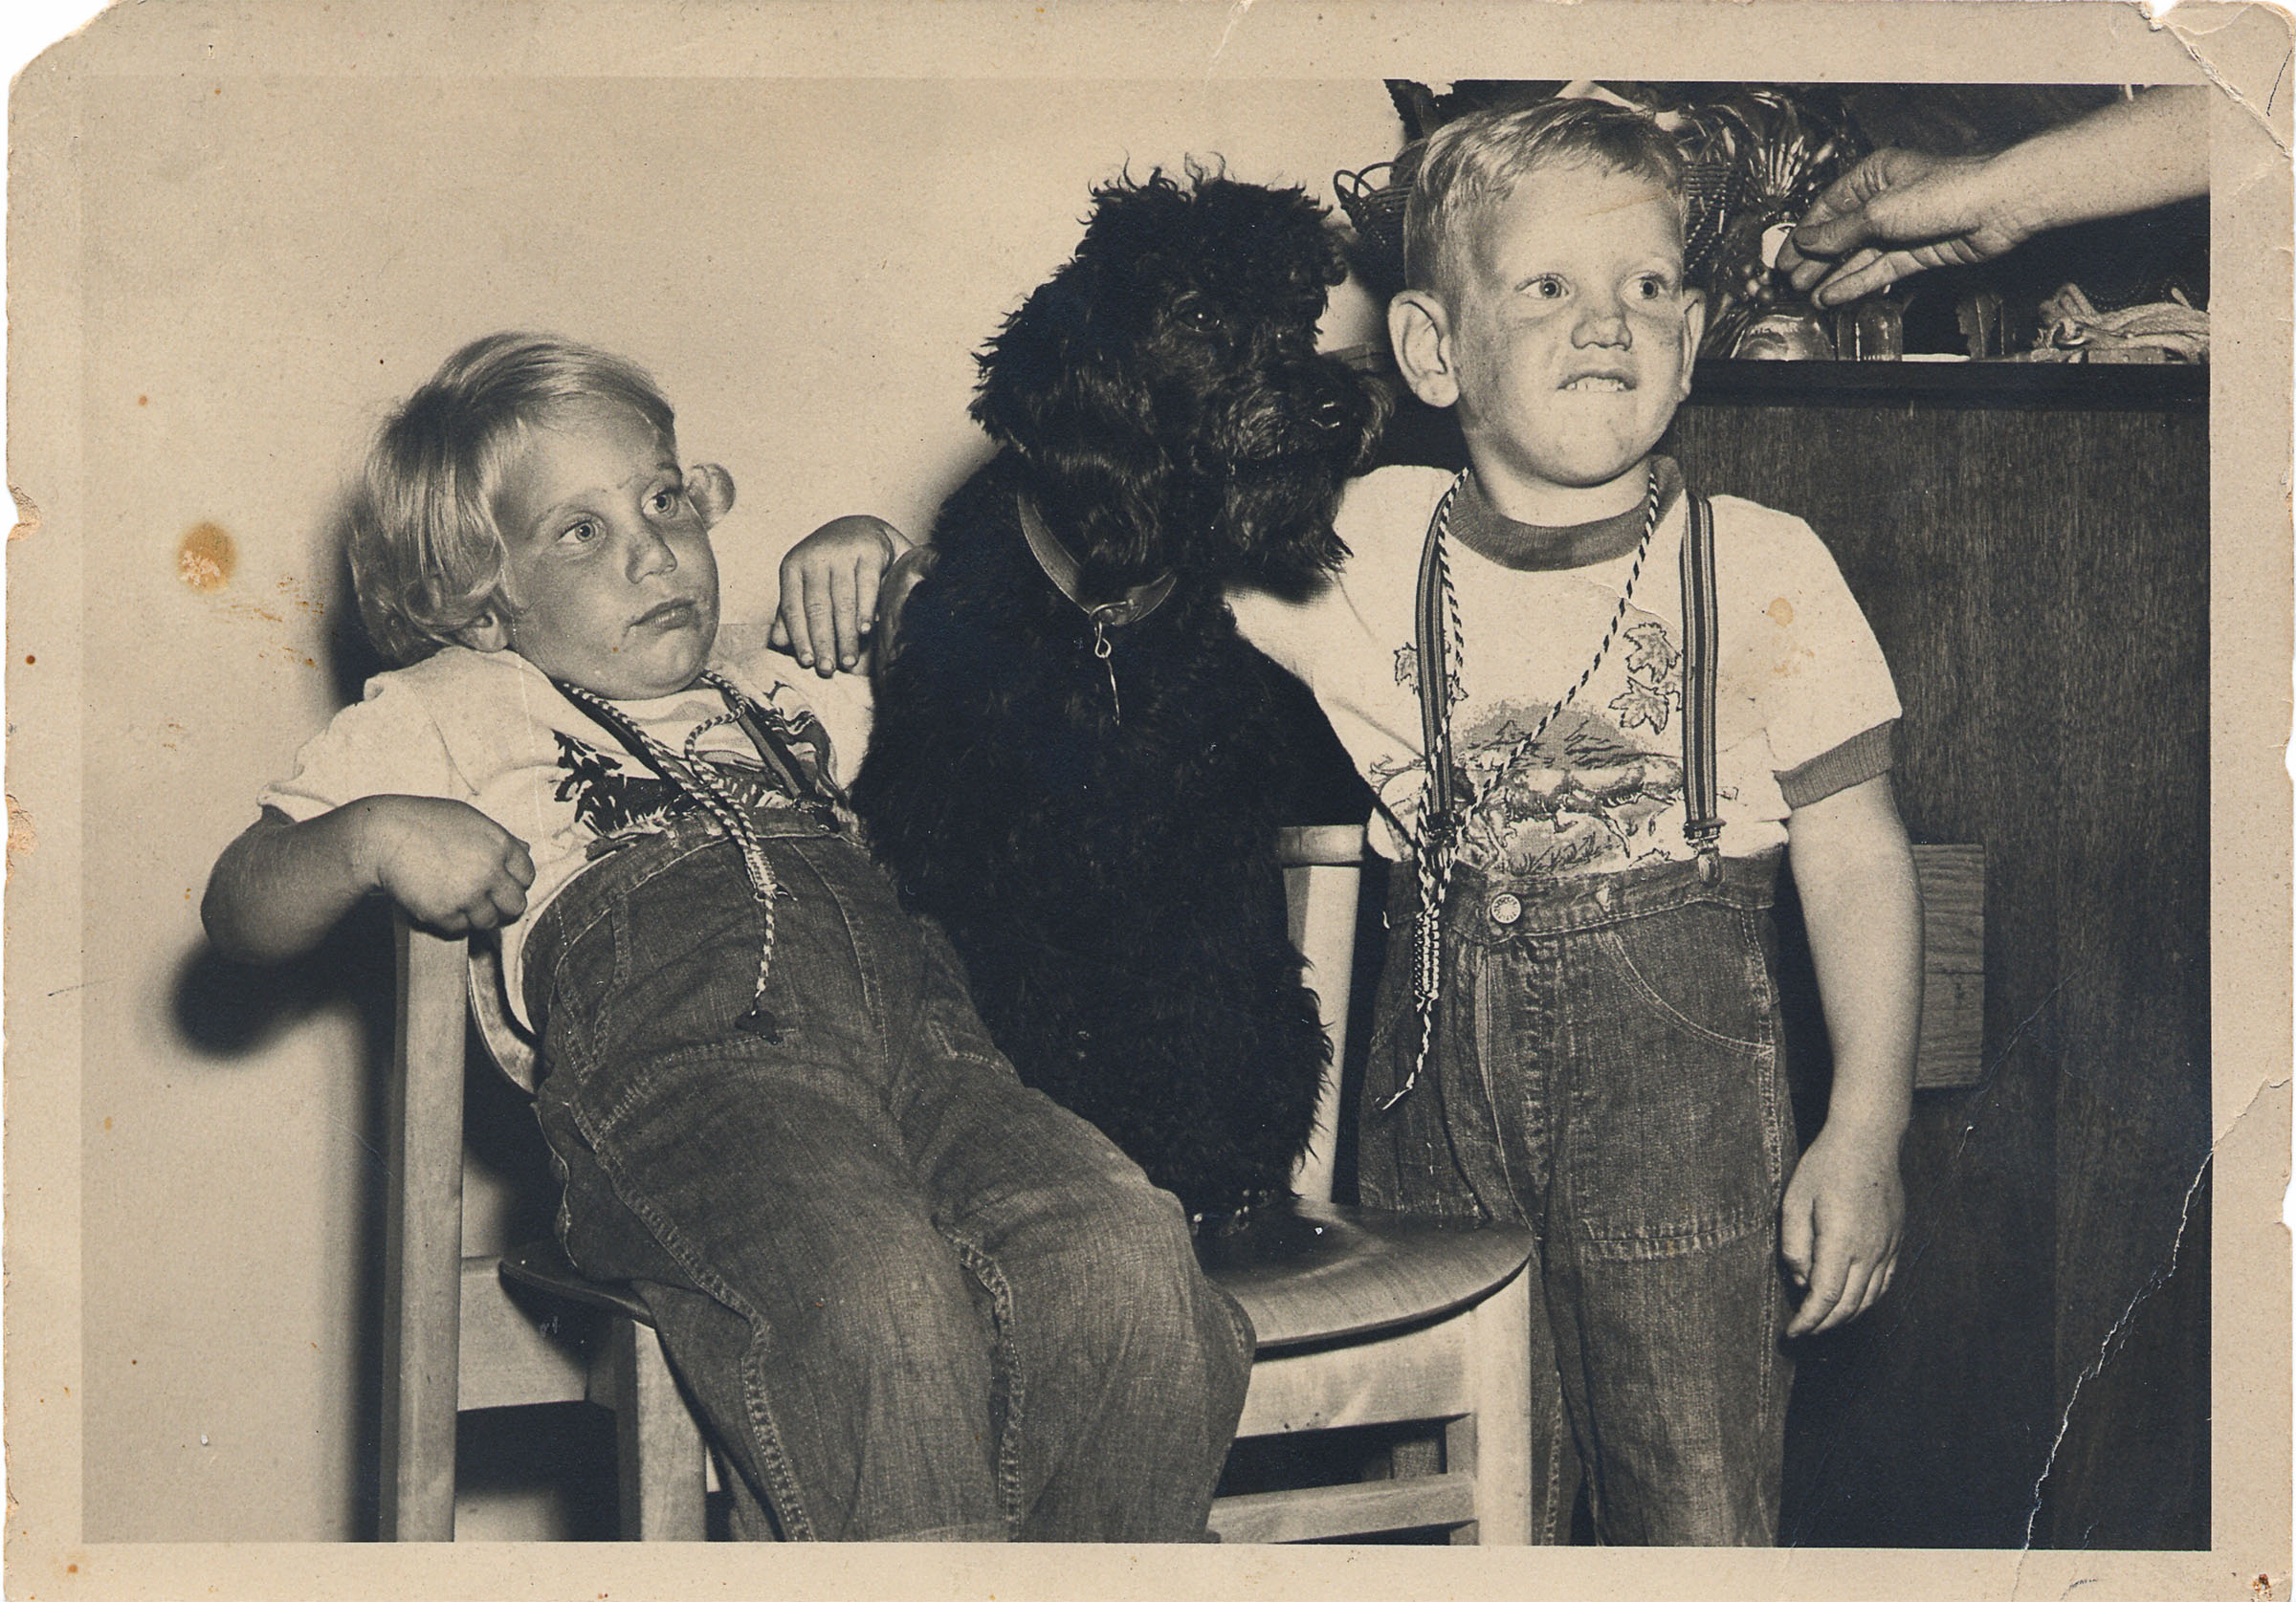 A vintage photograph of Ray Benson and his sister Sandy Katz slouching in a chair